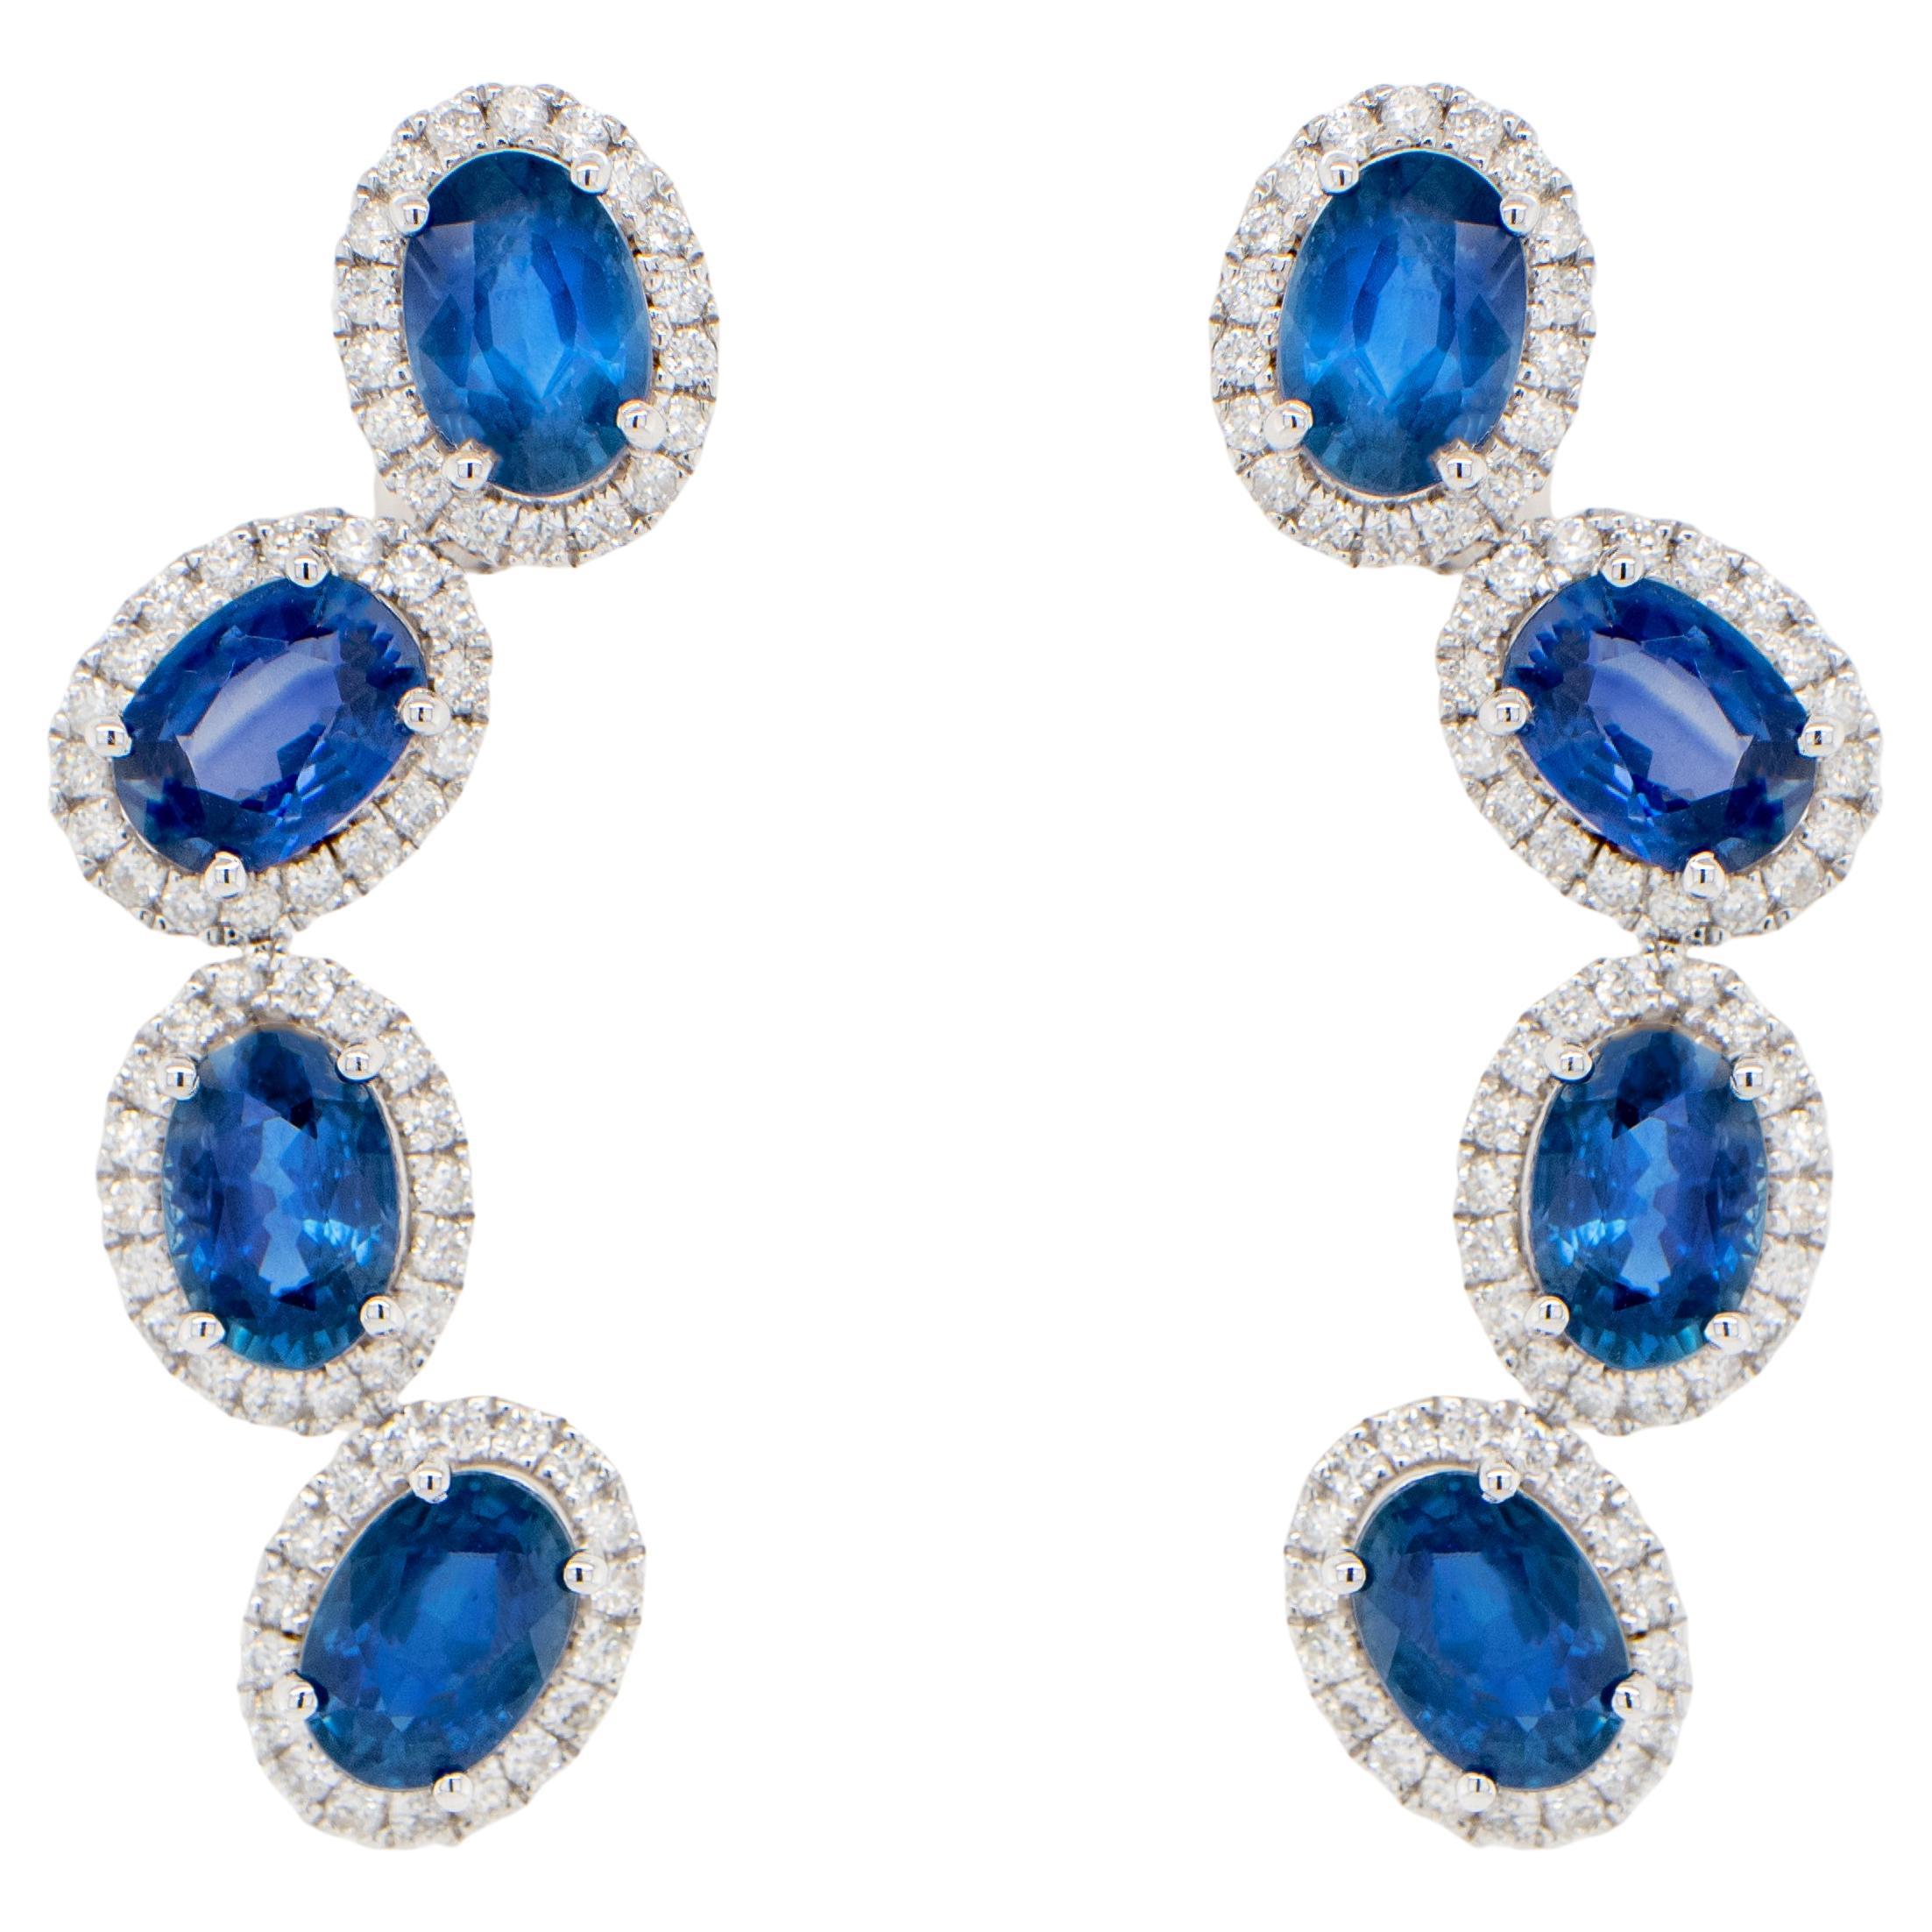 Blue Sapphire Earrings With Diamonds 5.69 Carats 18K Gold For Sale